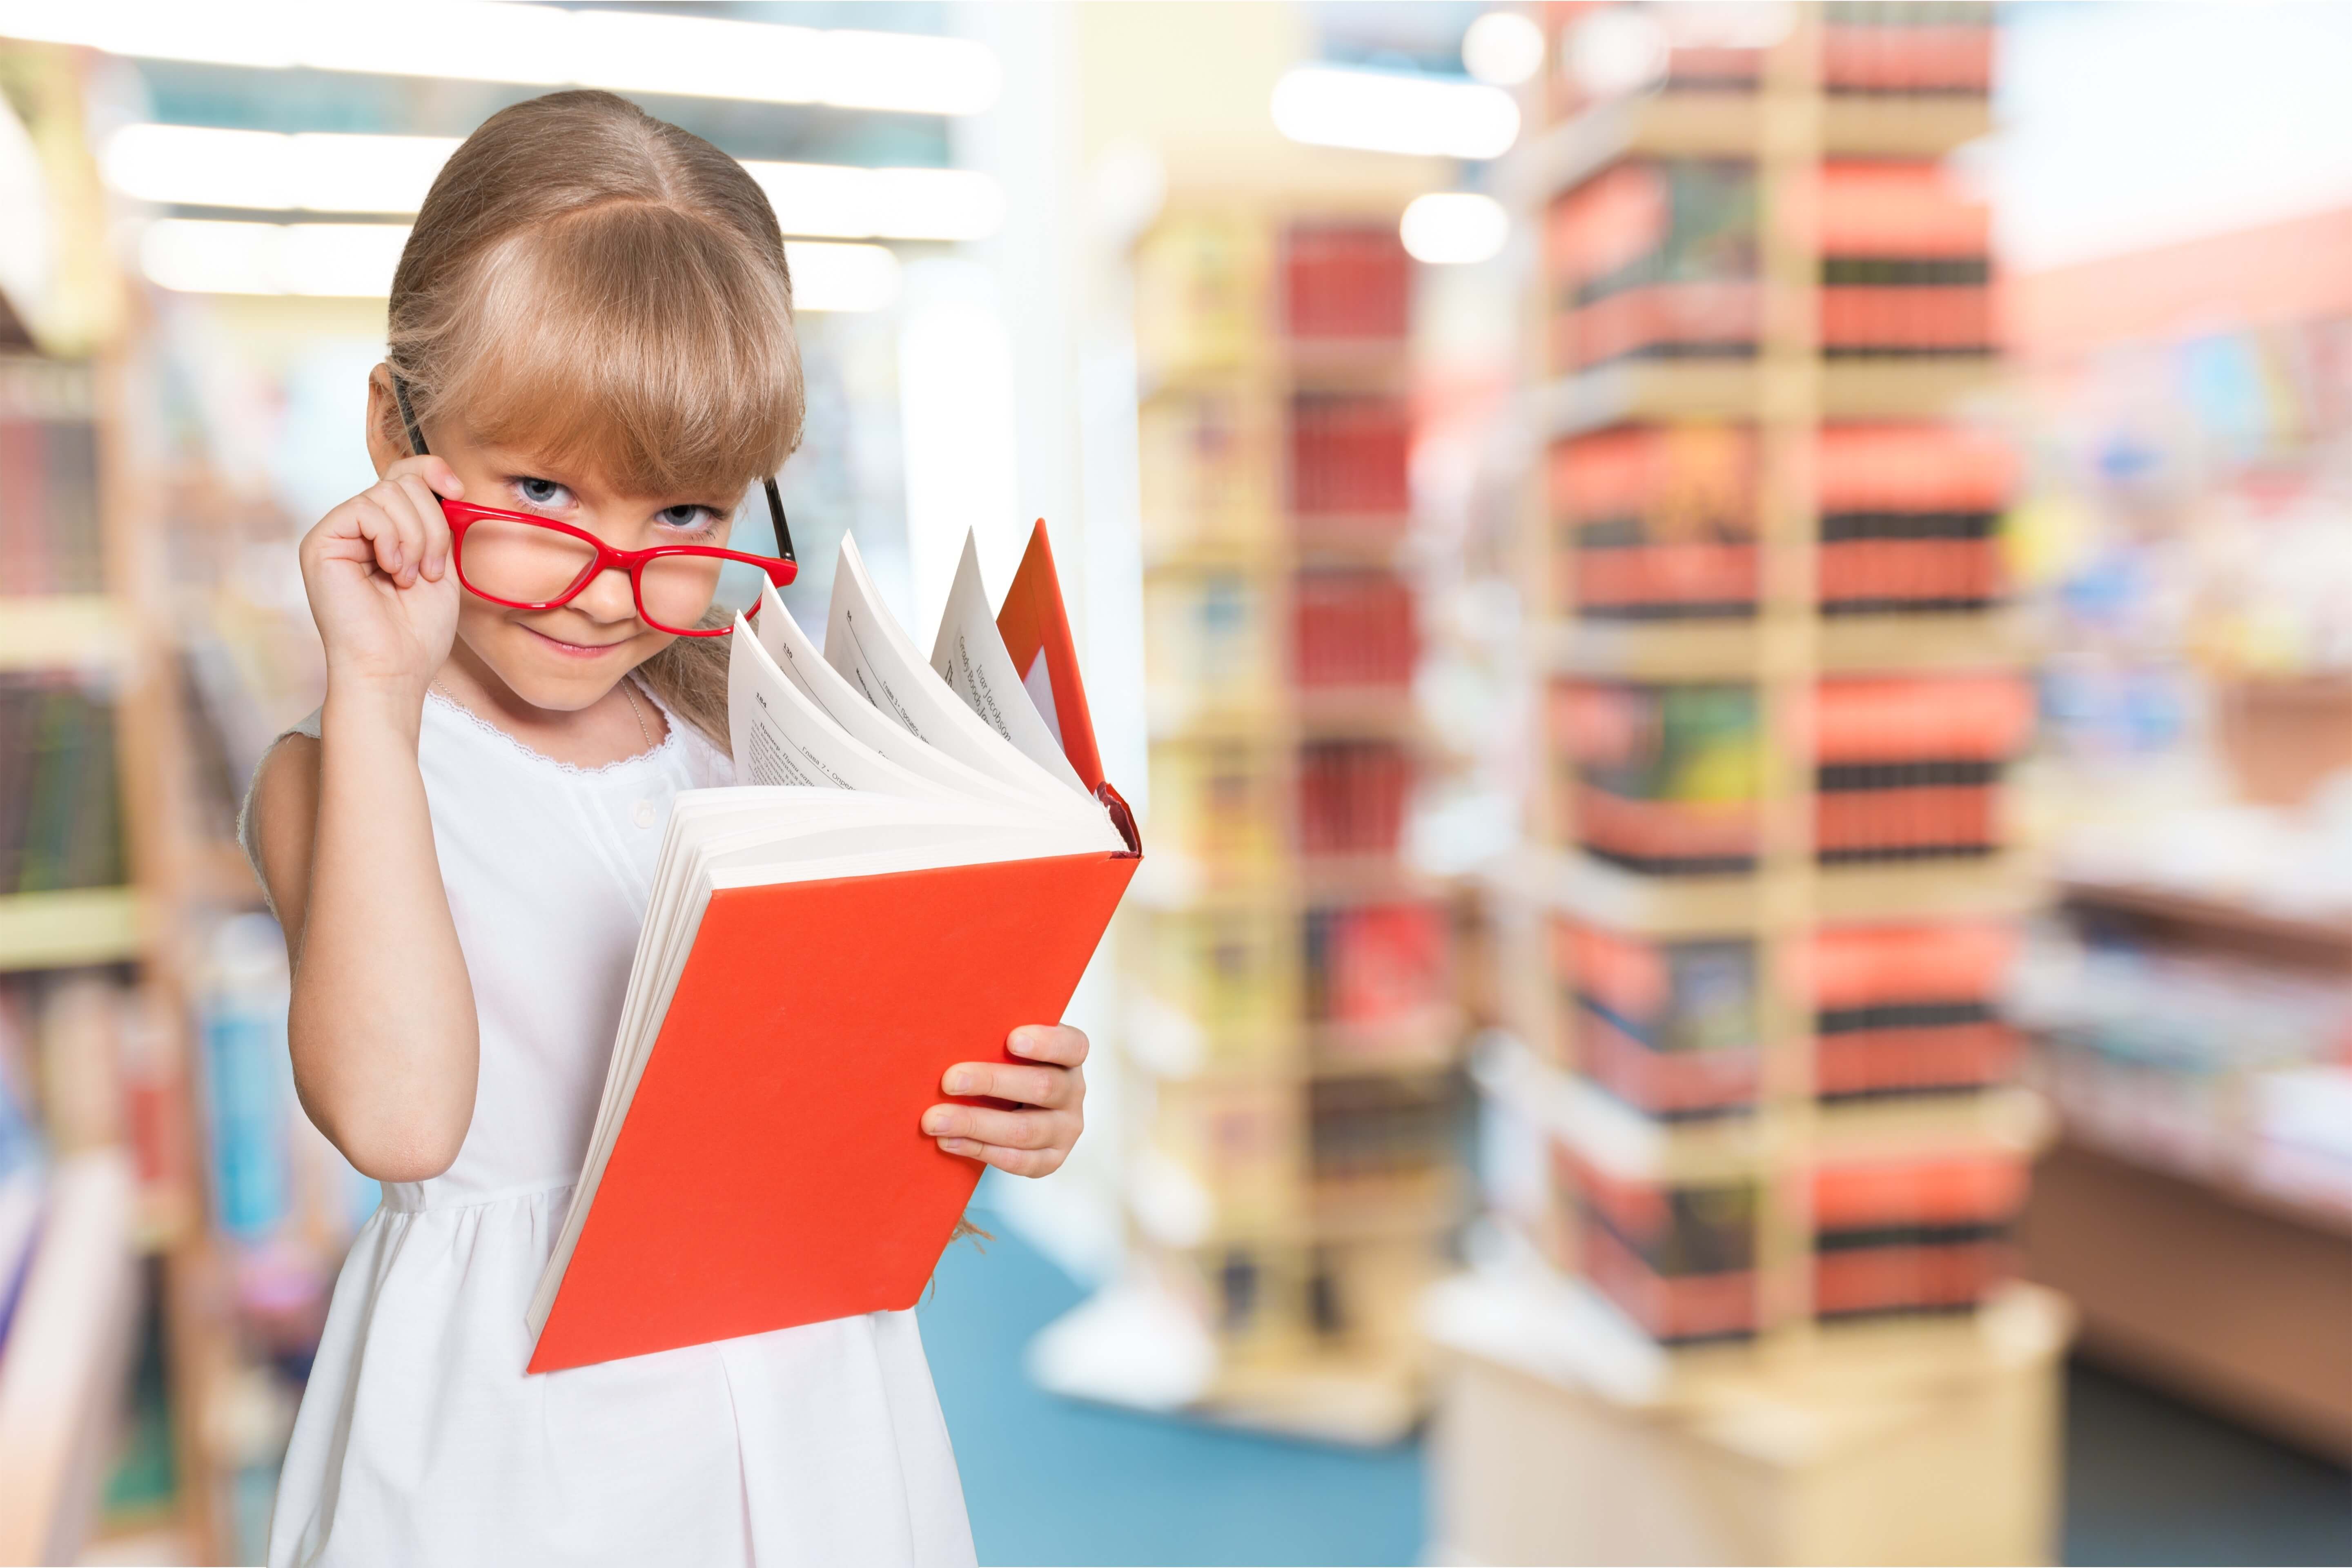 Little girl with glasses reading a book in the library